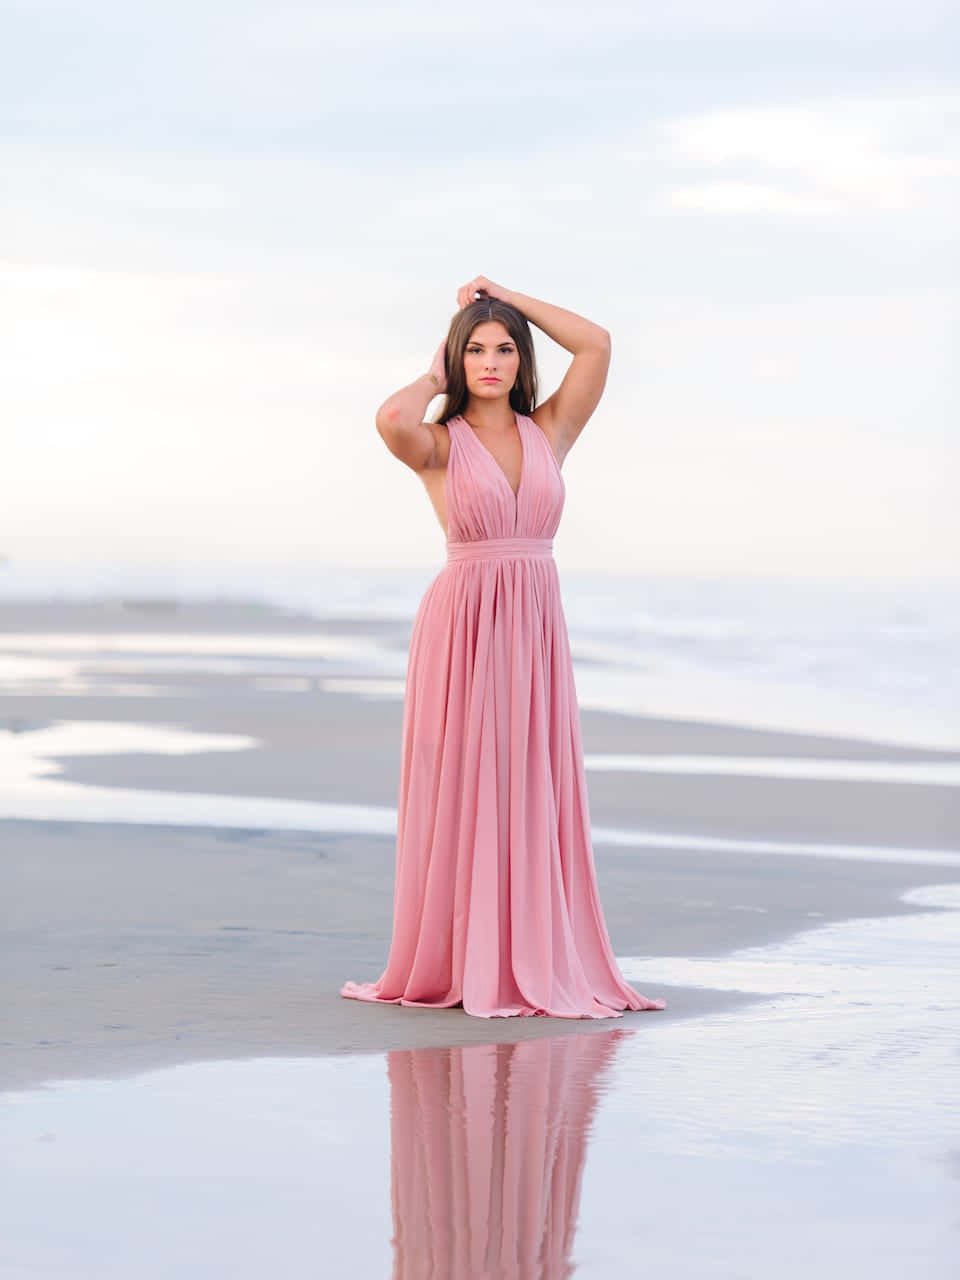 Lady In A Pink Long Dress Near The Beach Picture